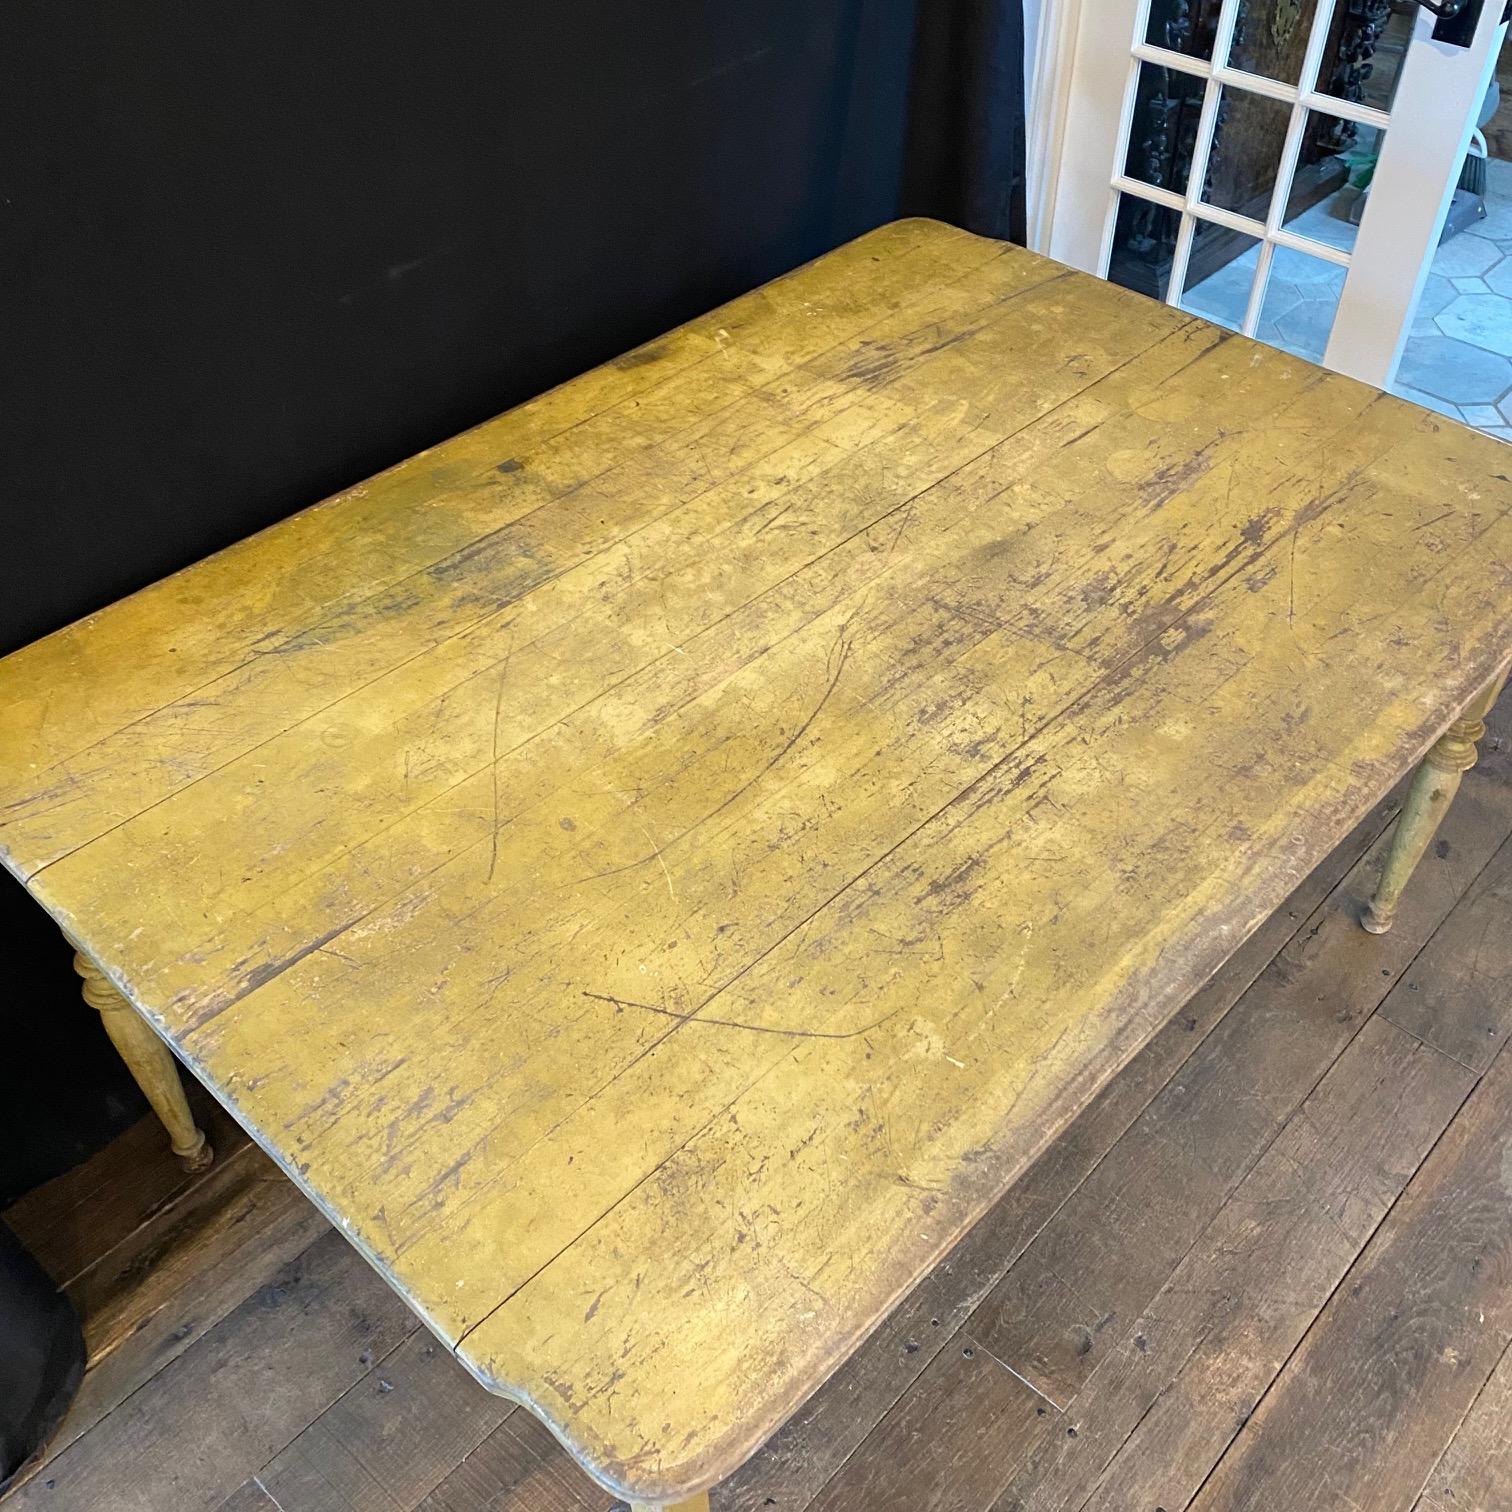 Wonderful primitive antique painted maple farmhouse table having tongue in groove top with curved ends, all supported on early hand turned legs.  Its original yellow milk paint is stunning! Use as a kitchen table, console table, or even a desk. 